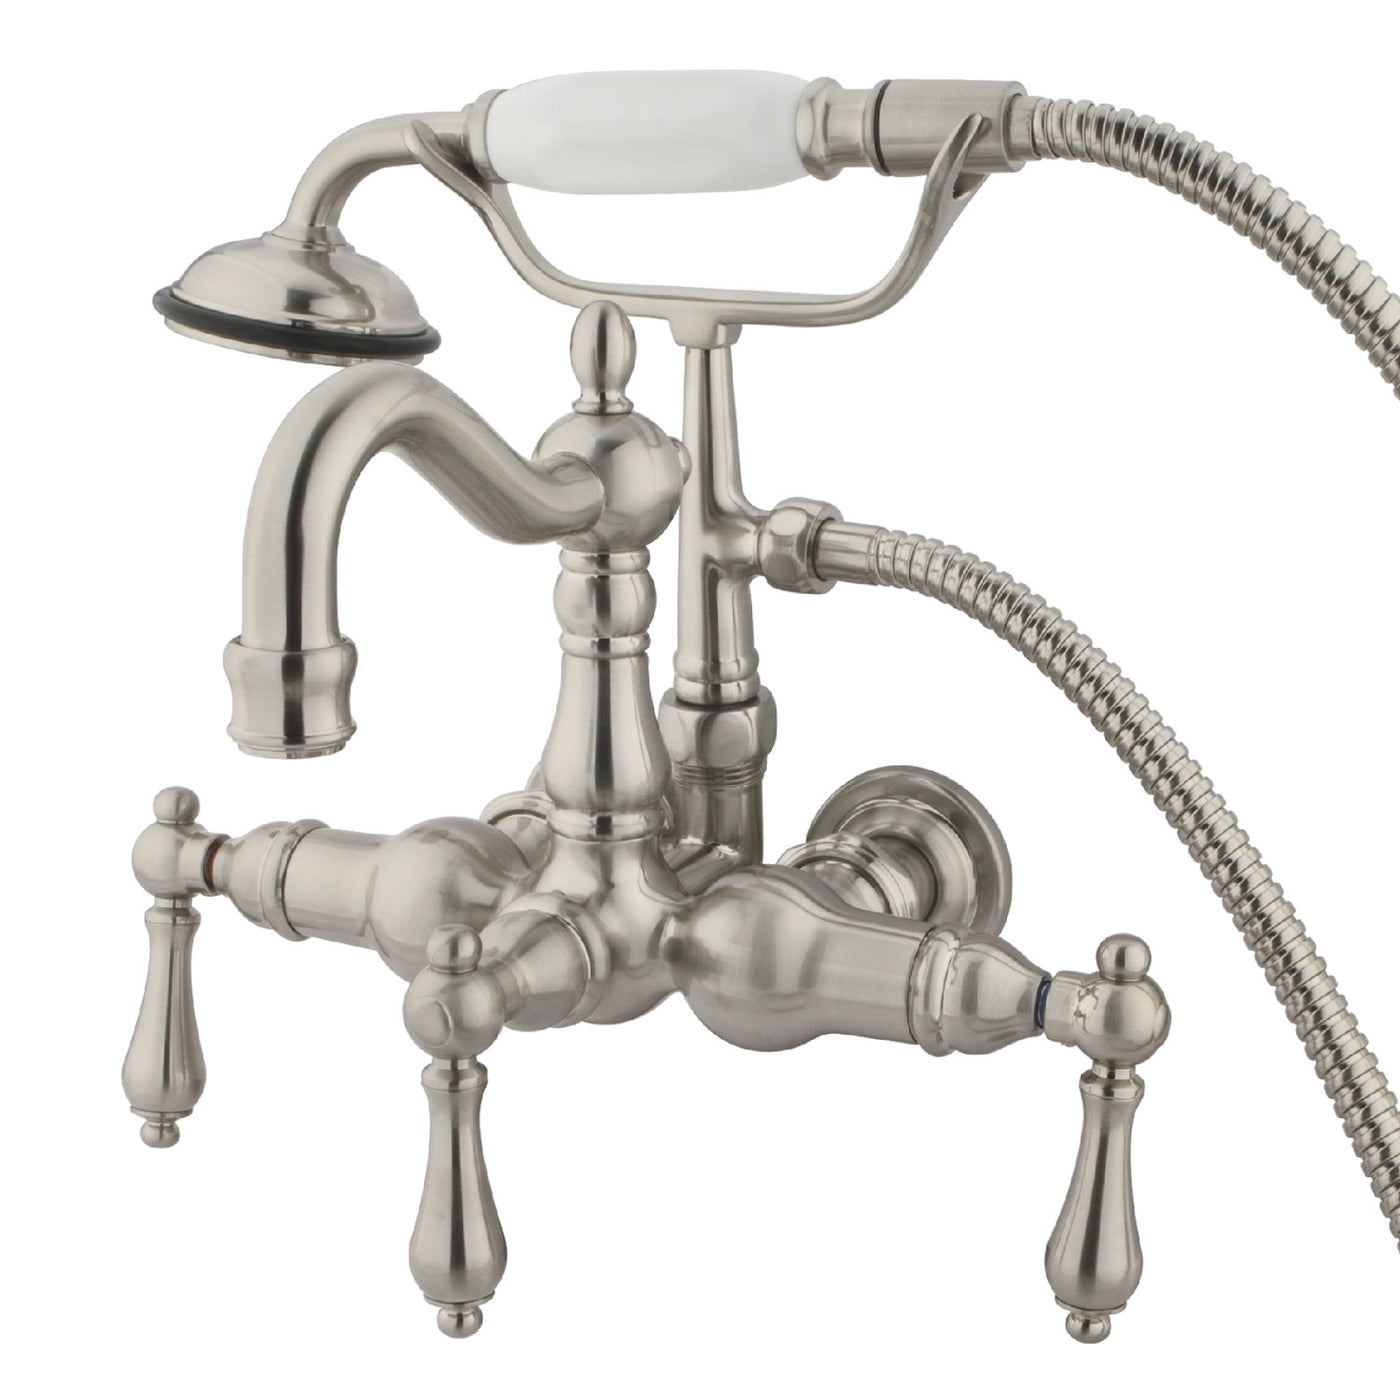 Elements of Design DT10078AL 3-3/8-Inch Wall Mount Tub Faucet, Brushed Nickel